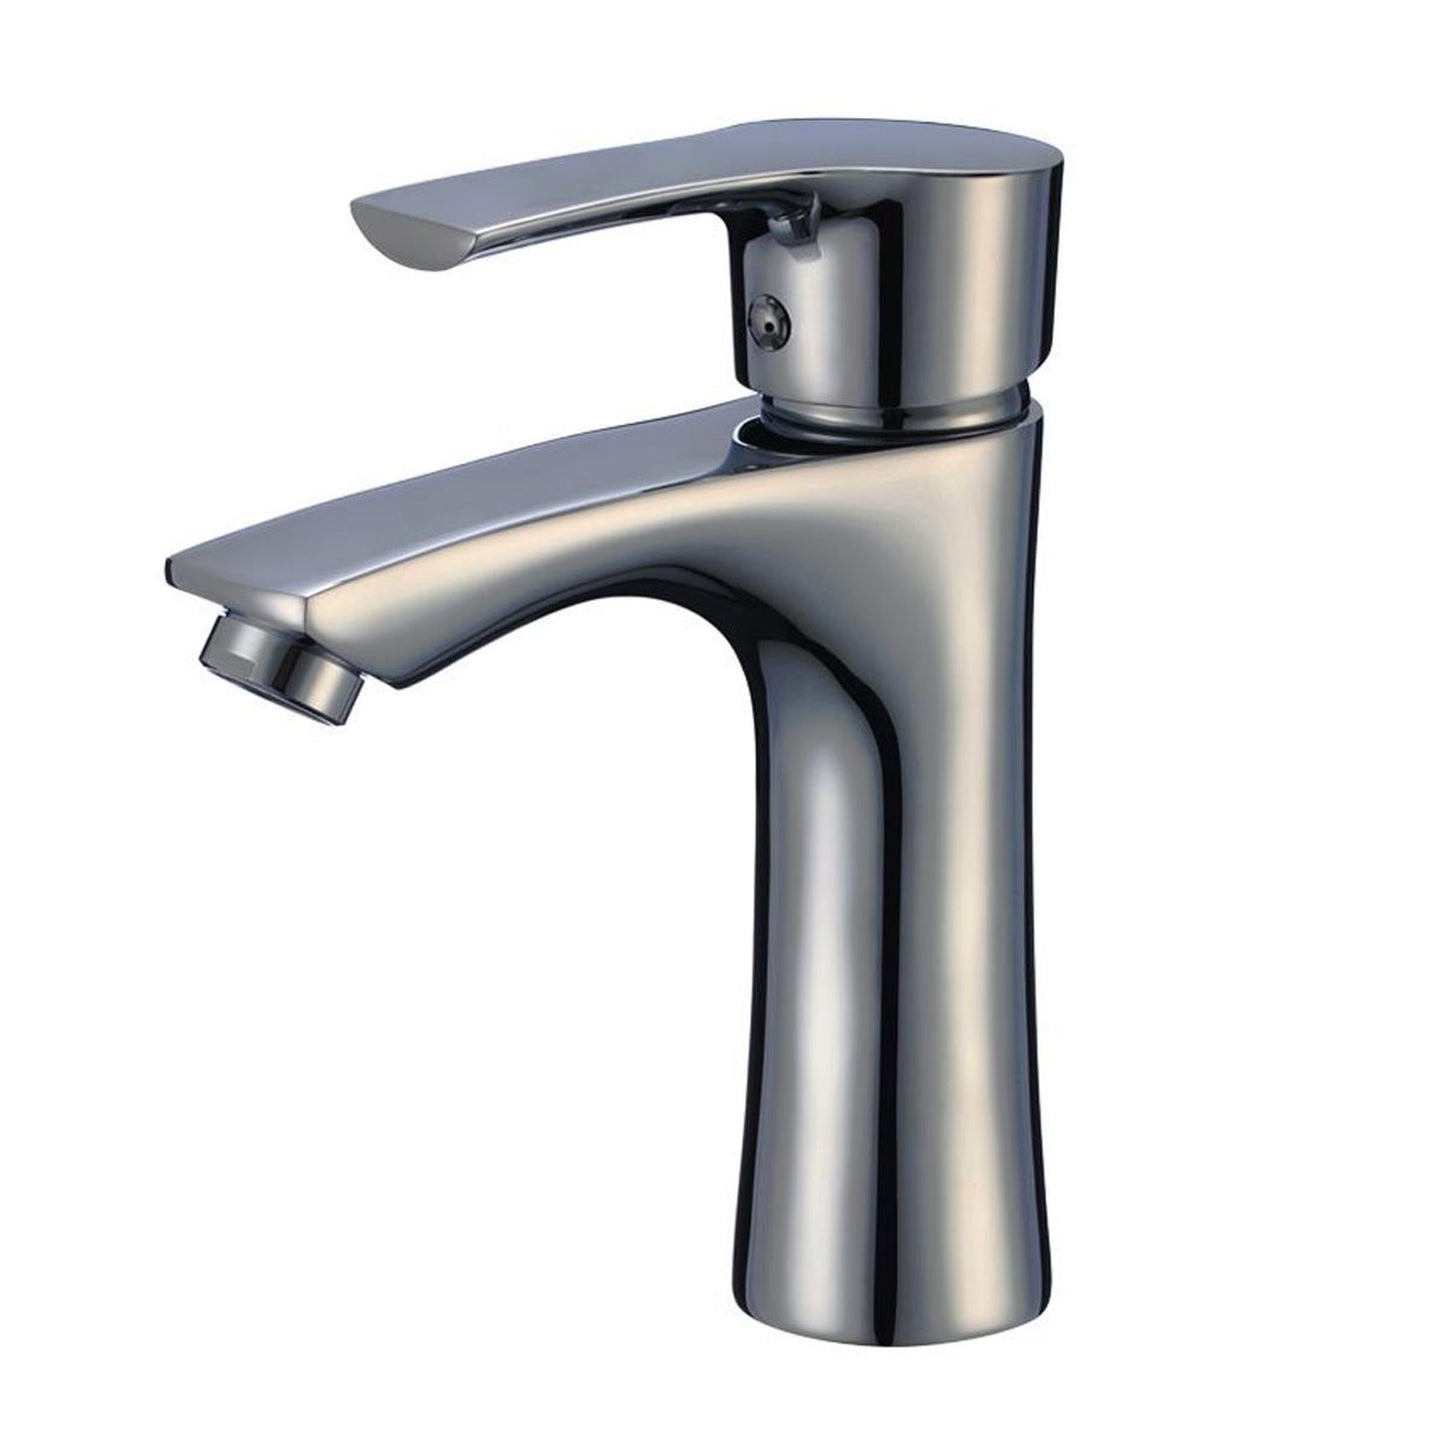 Pelican Int'l Cascade Series PL-8162 Single Hole Bathroom Faucet In Brushed Nickel Finish